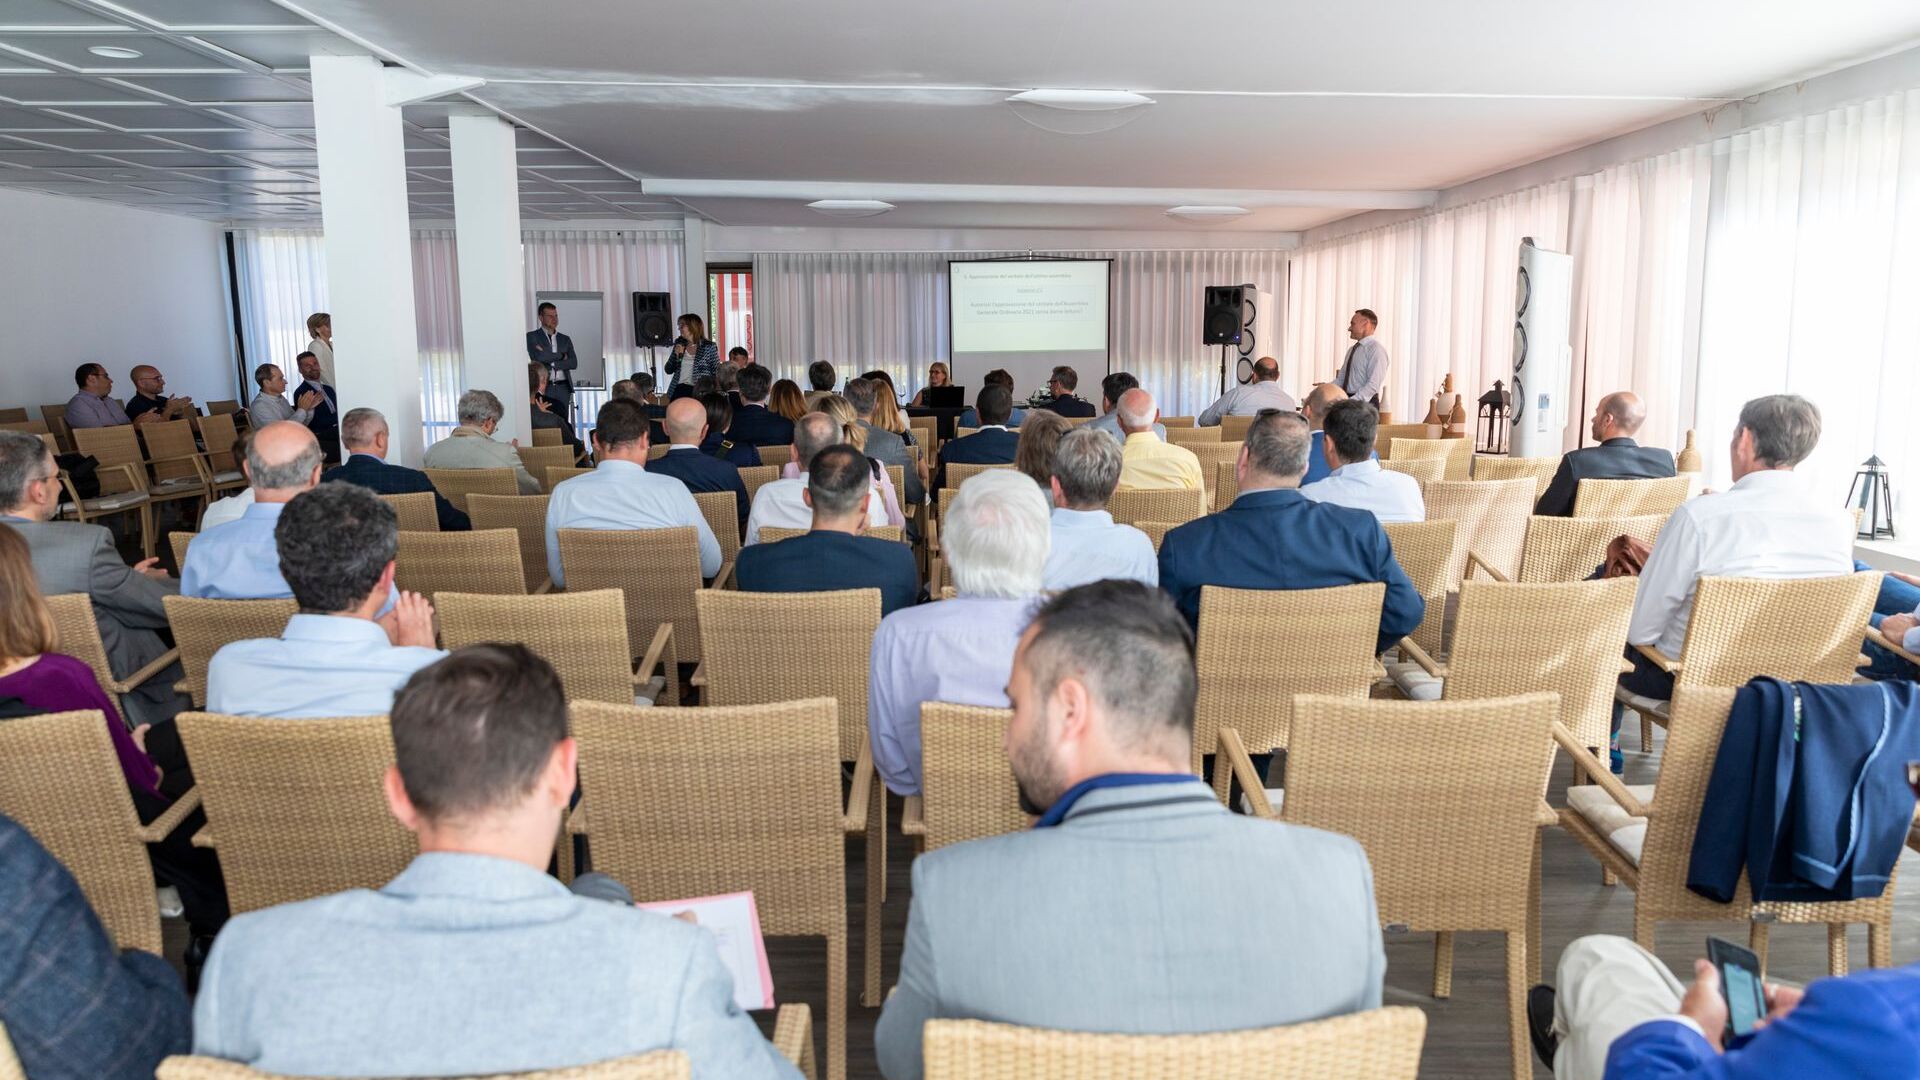 The Ordinary General Assembly of the ated-ICT Ticino association was held on 7 June 2022 in Cadro